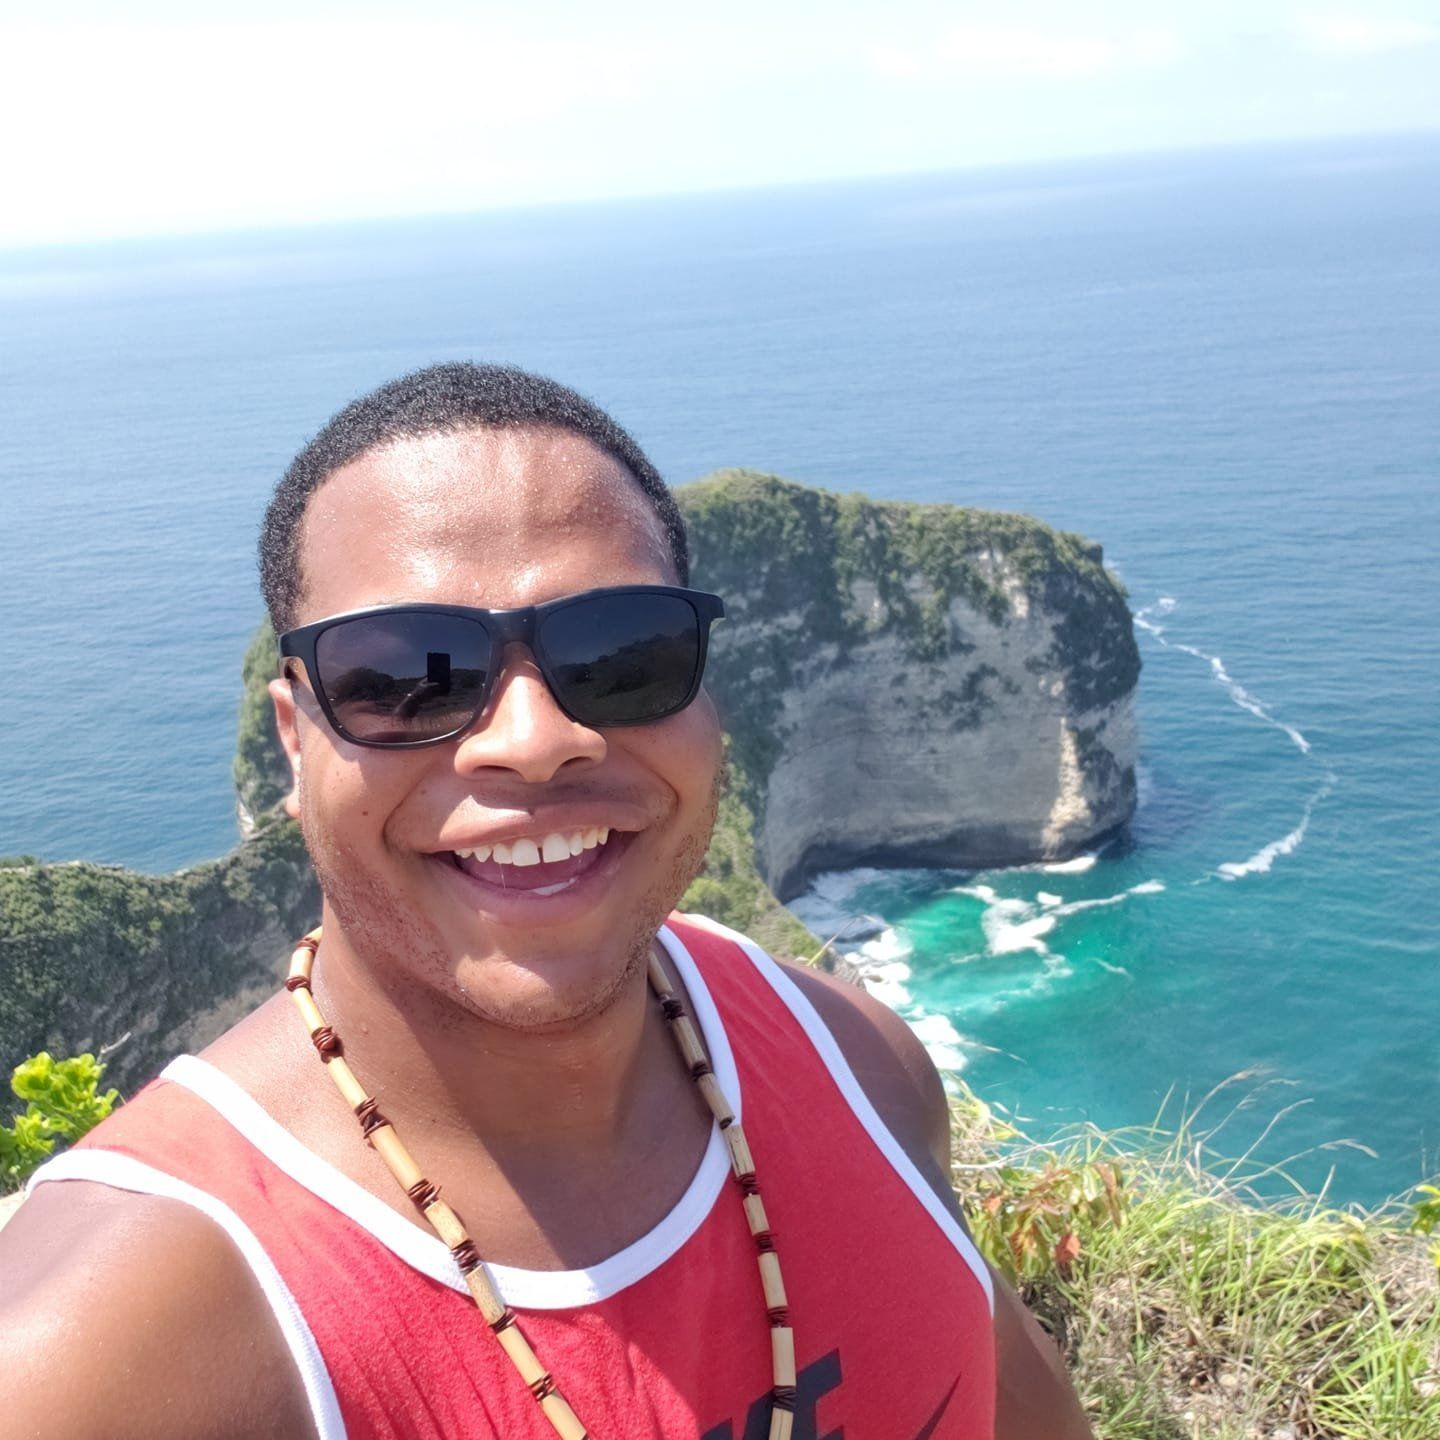 A man wearing sunglasses and a red tank top smiles in front of the ocean